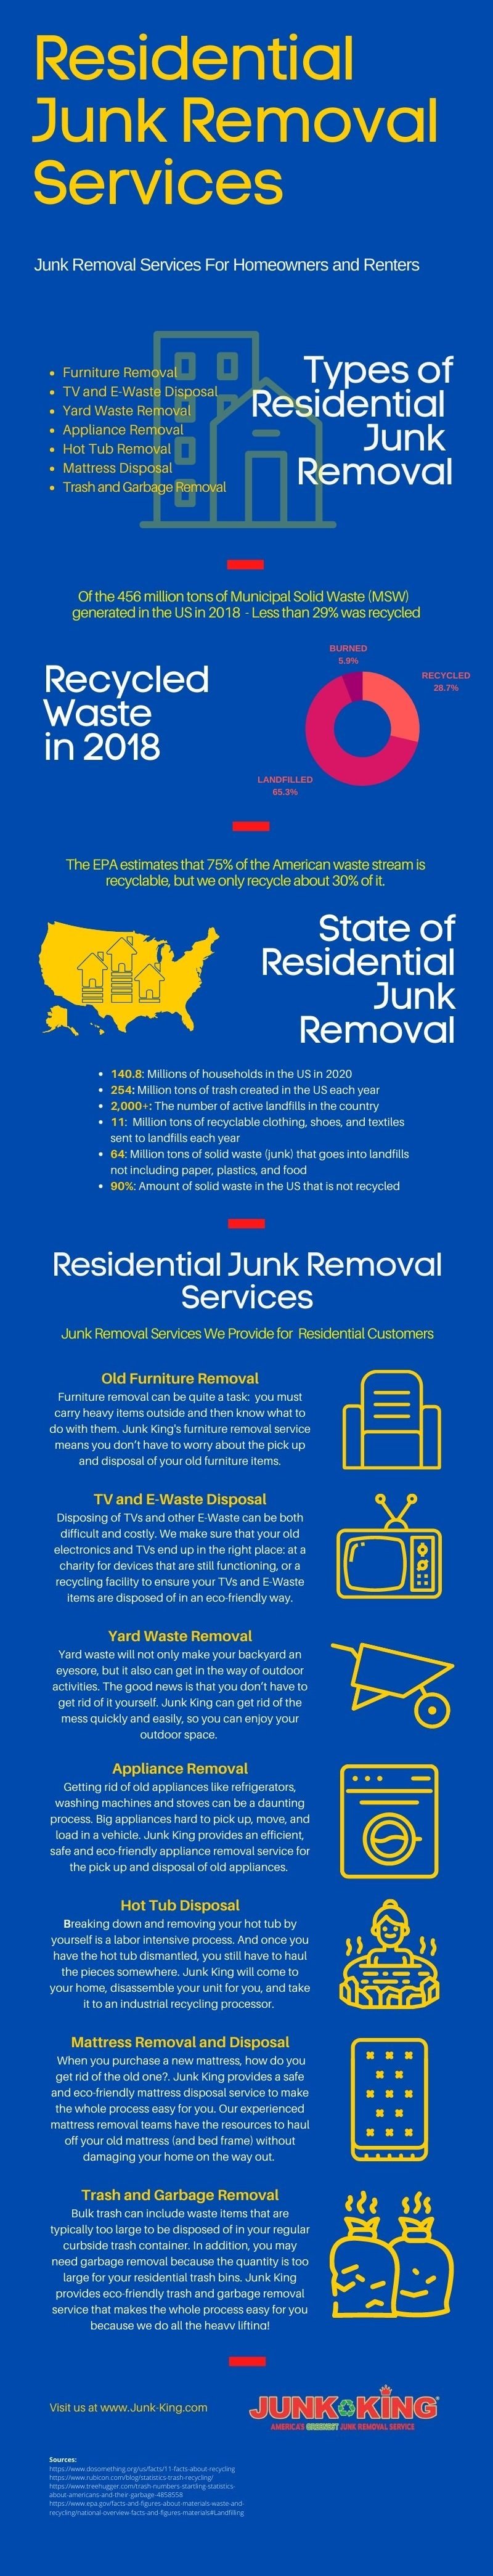 residential-junk-removal-services